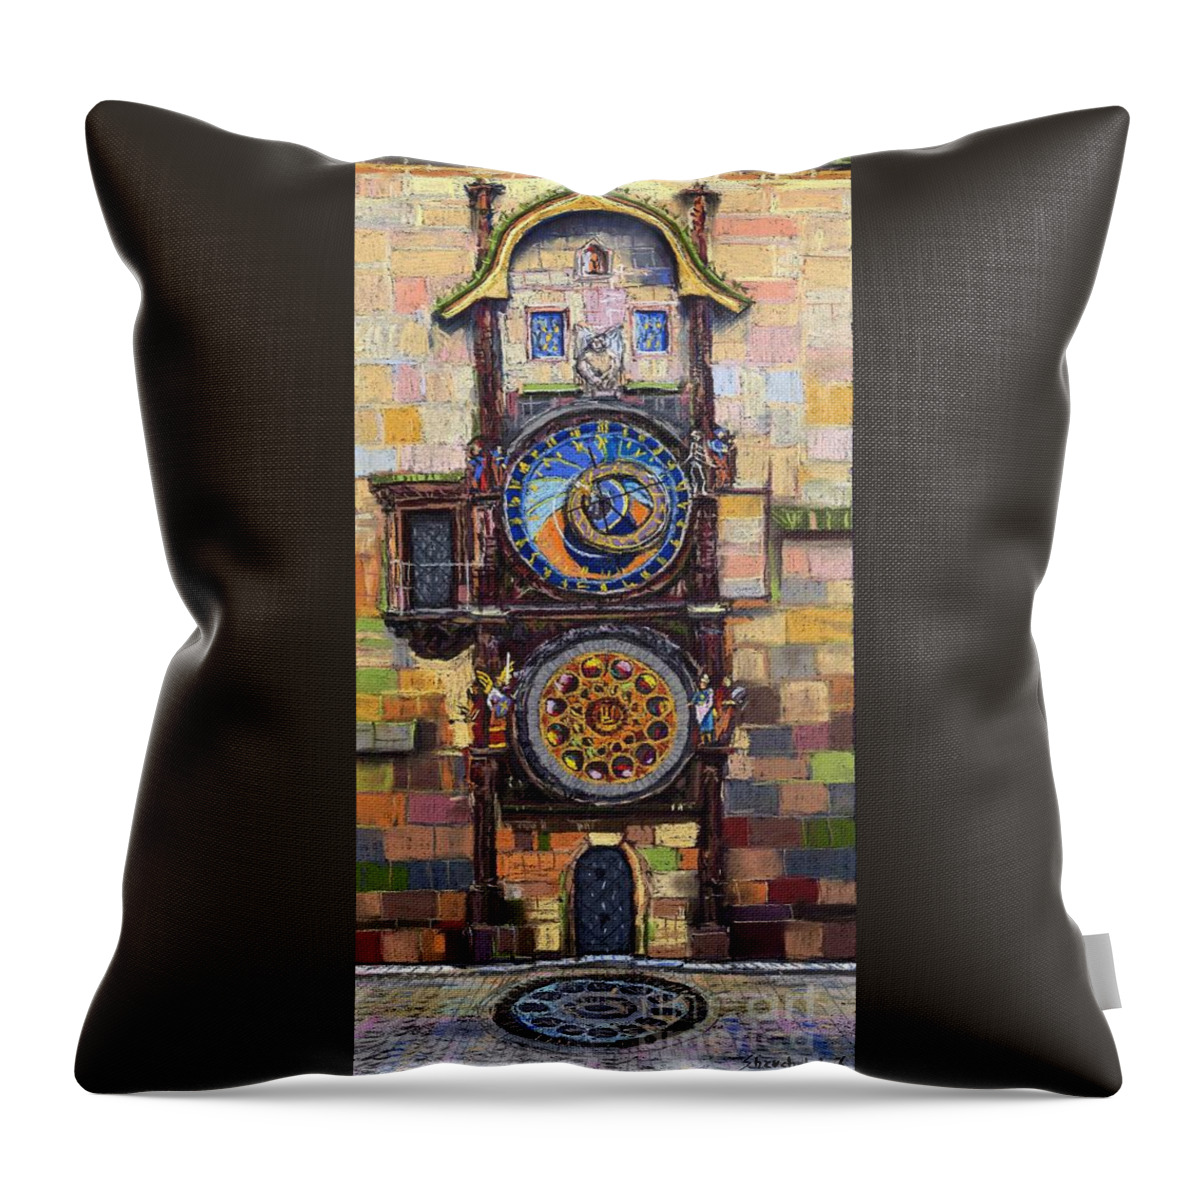 Cityscape Throw Pillow featuring the painting Prague The Horologue at OldTownHall by Yuriy Shevchuk